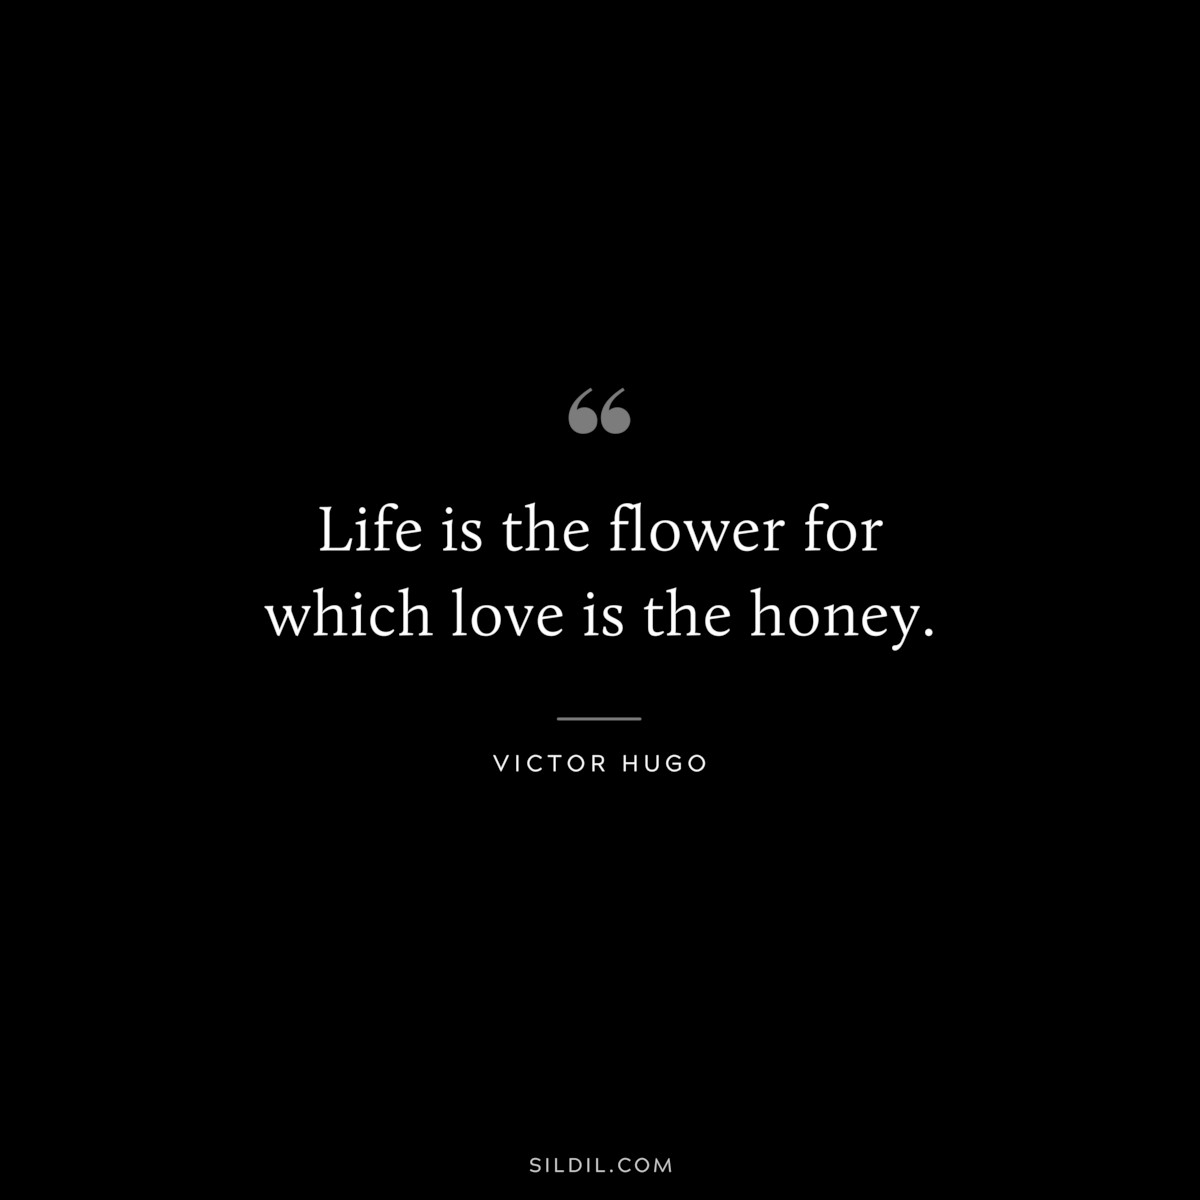 Life is the flower for which love is the honey.― Victor Hugo